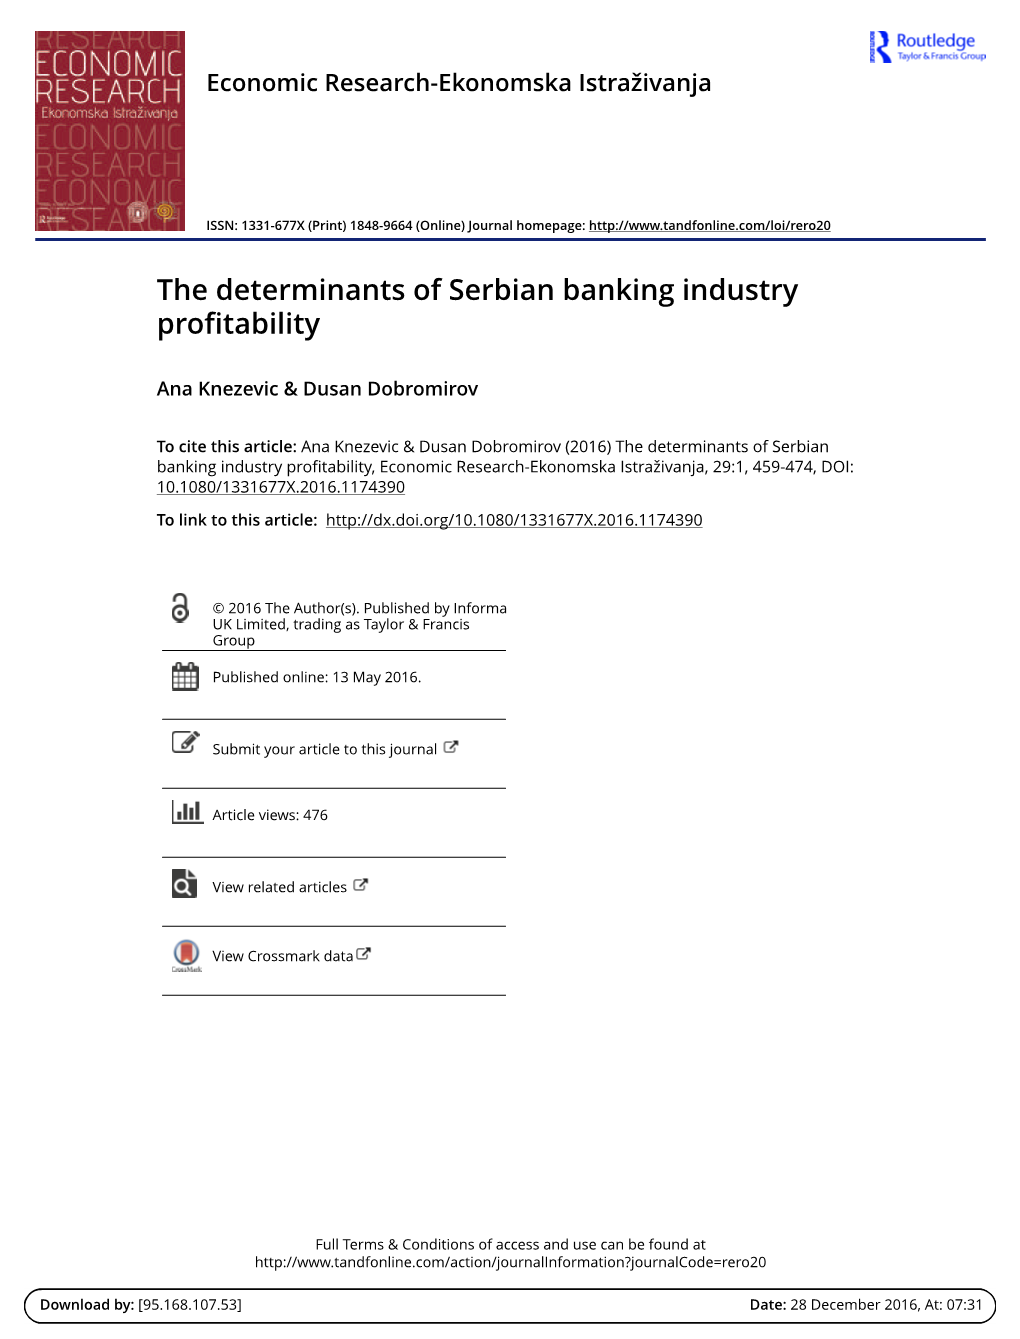 The Determinants of Serbian Banking Industry Profitability